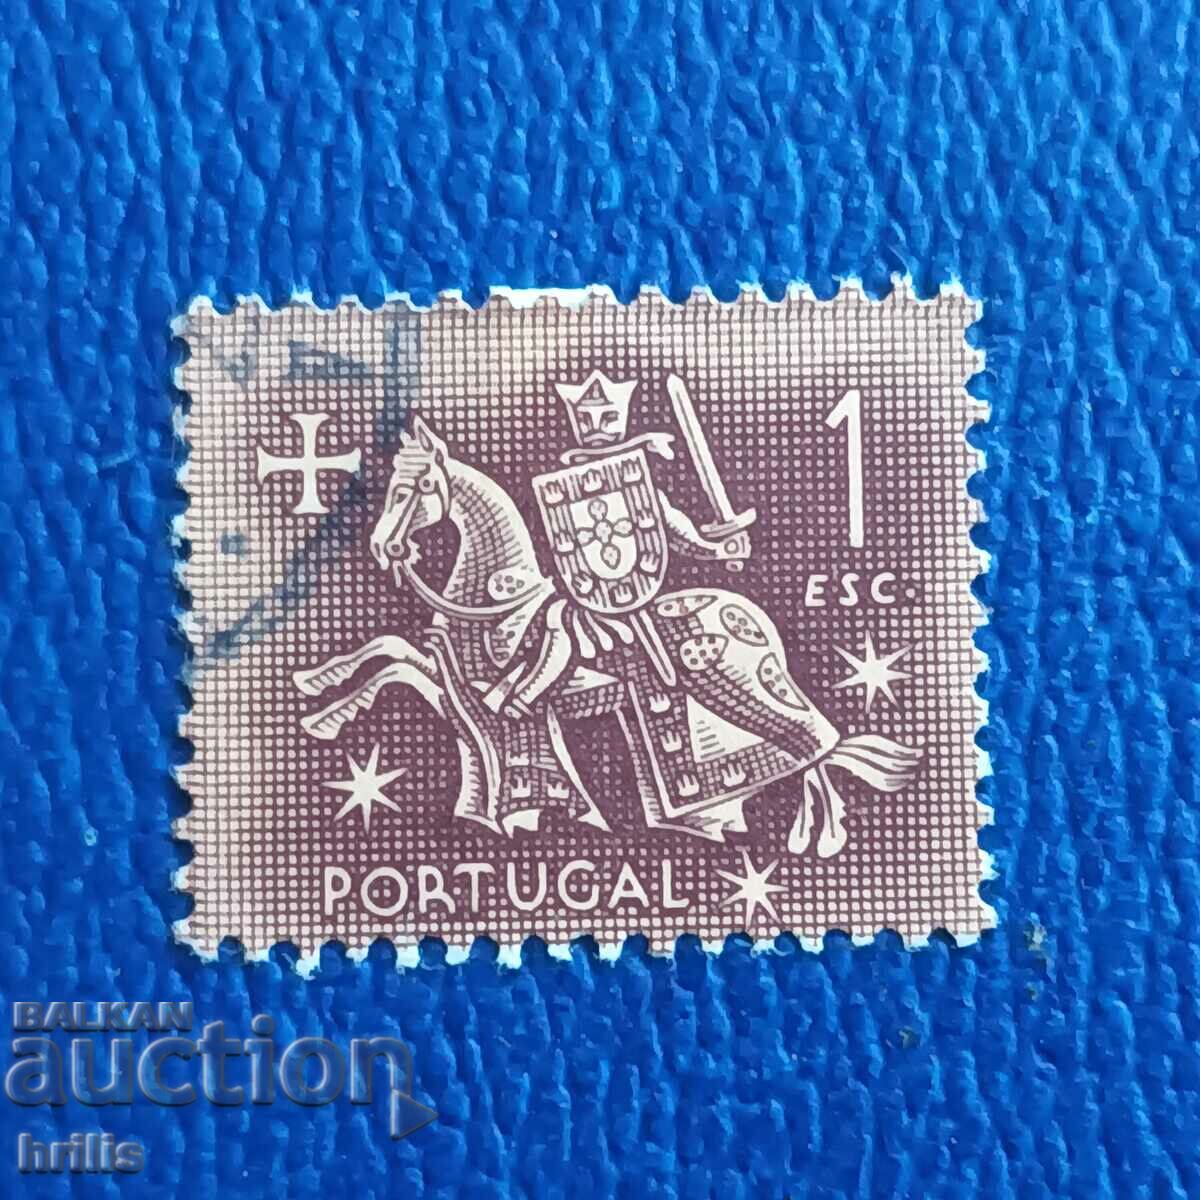 PORTUGAL - OLD BRAND, SERIES